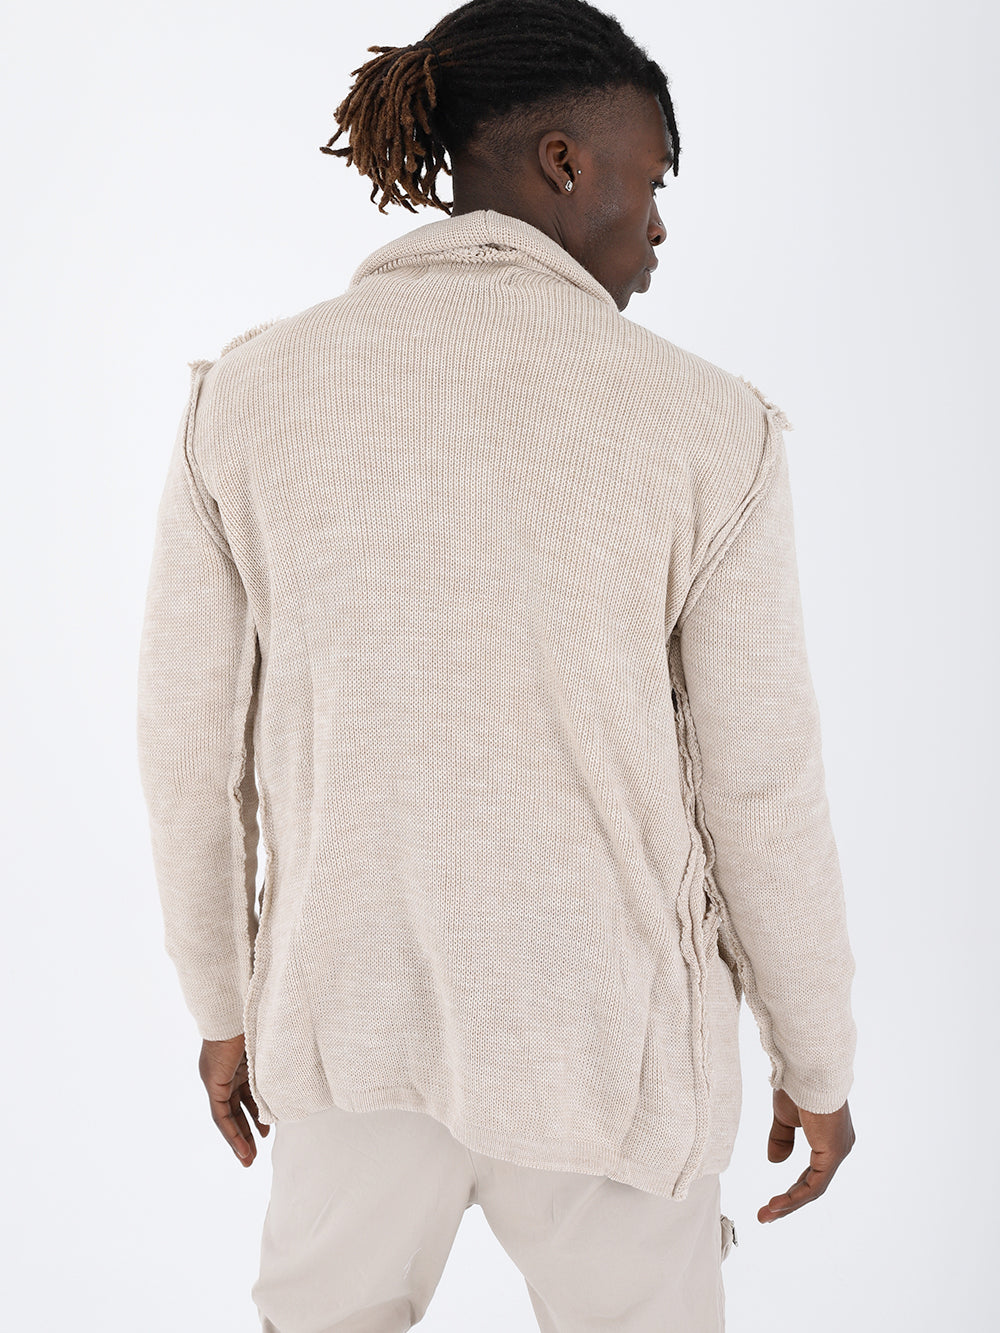 The man wearing an ASYMMETRIC SHORT CARDIGAN // IVORY and khaki pants has a true to size fit.